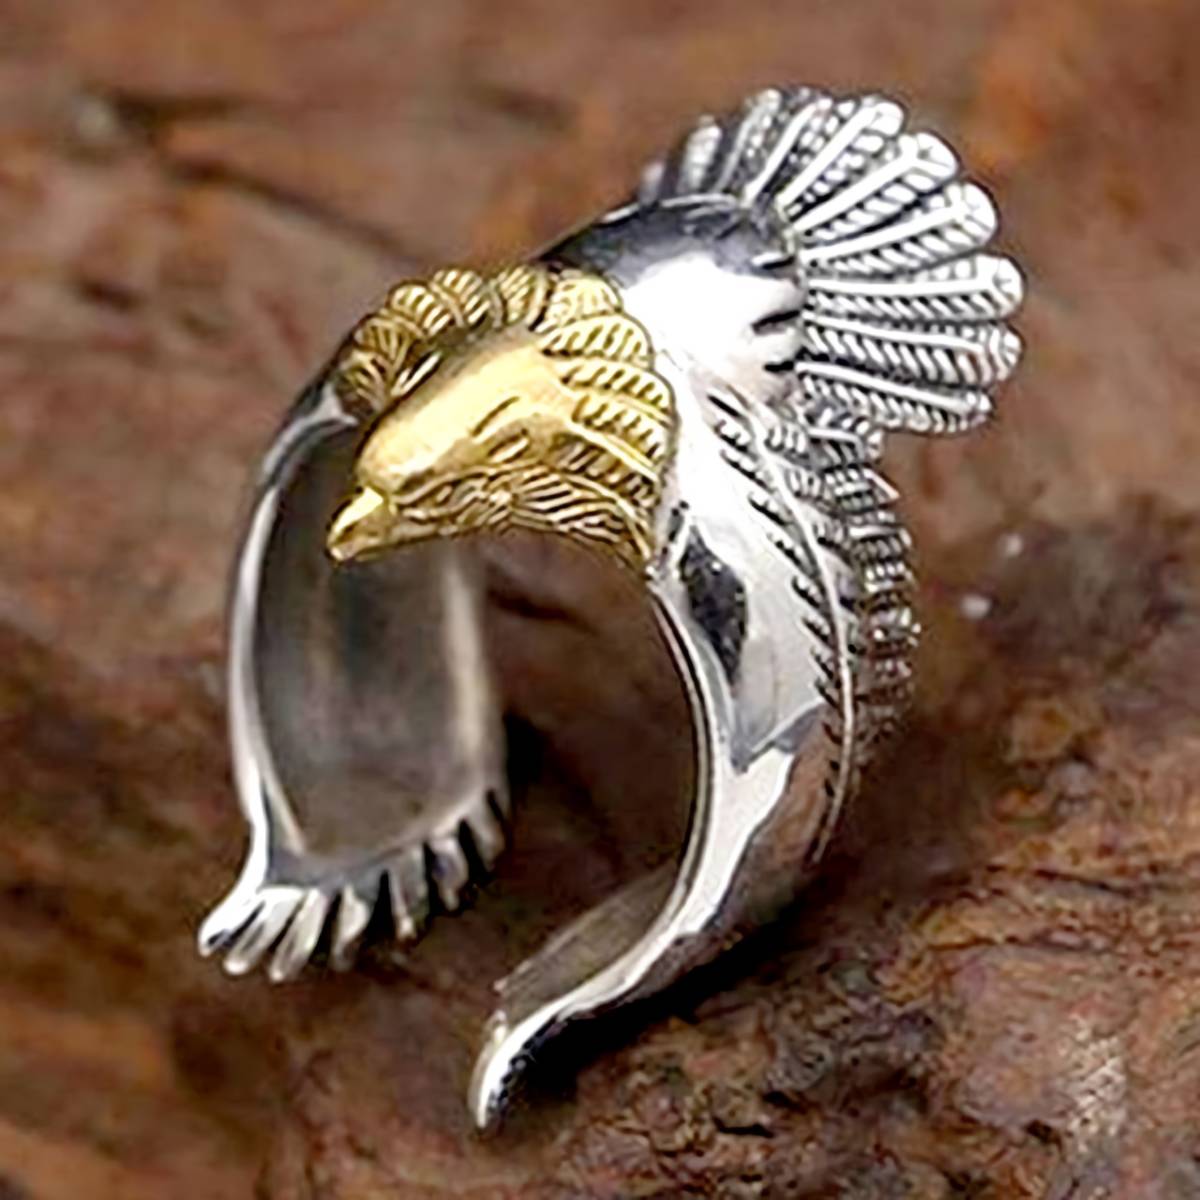  new goods 1 jpy ~* free shipping * free size gold paint Falcon yellow gold. hawk platinum finish 925 silver ring birthday present travel summer festival consecutive holidays gift domestic sending 